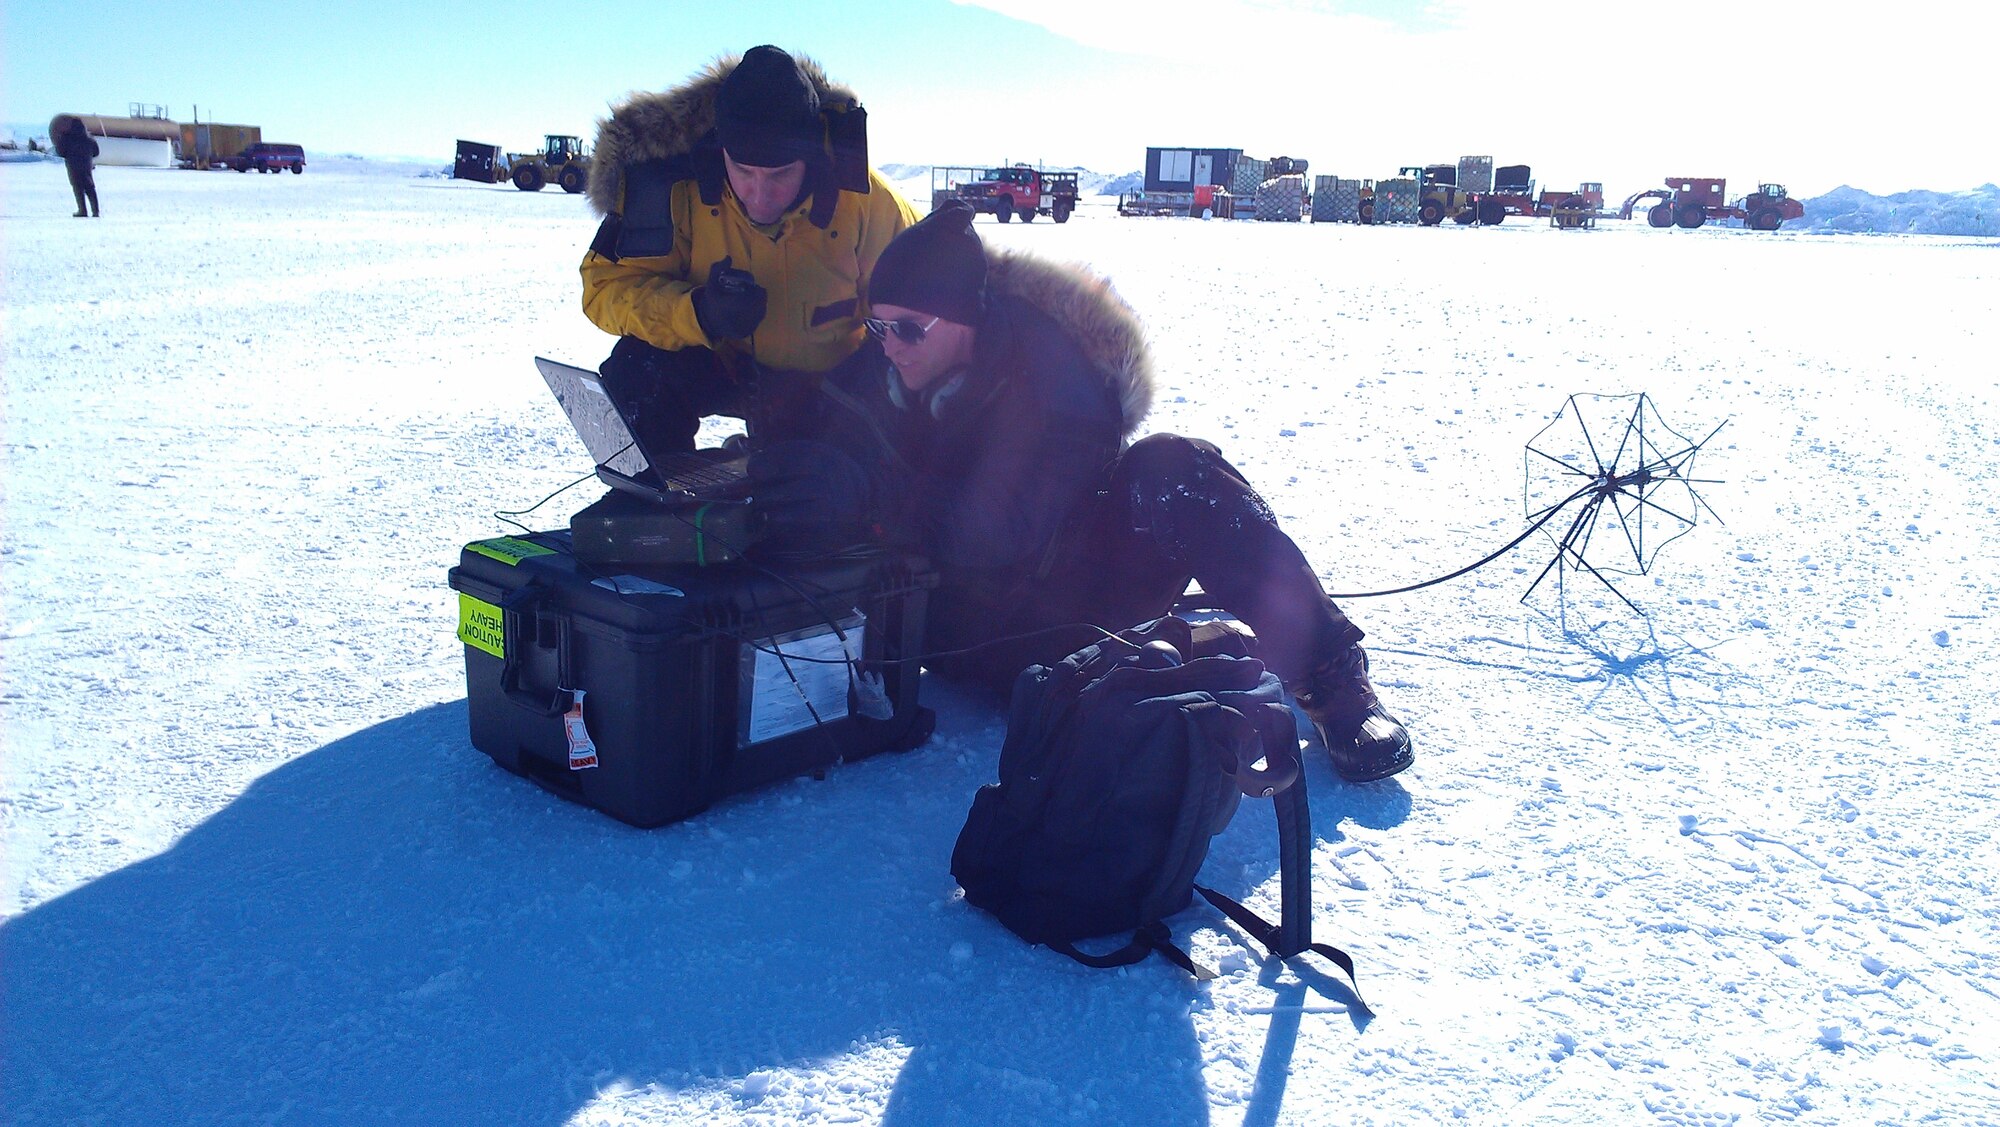 Members of an Air Force, Navy and Lockheed Martin team test a satellite communications system in Antarctica. The system is designed to provide communication capabilities in remote areas. (Air Force photo)